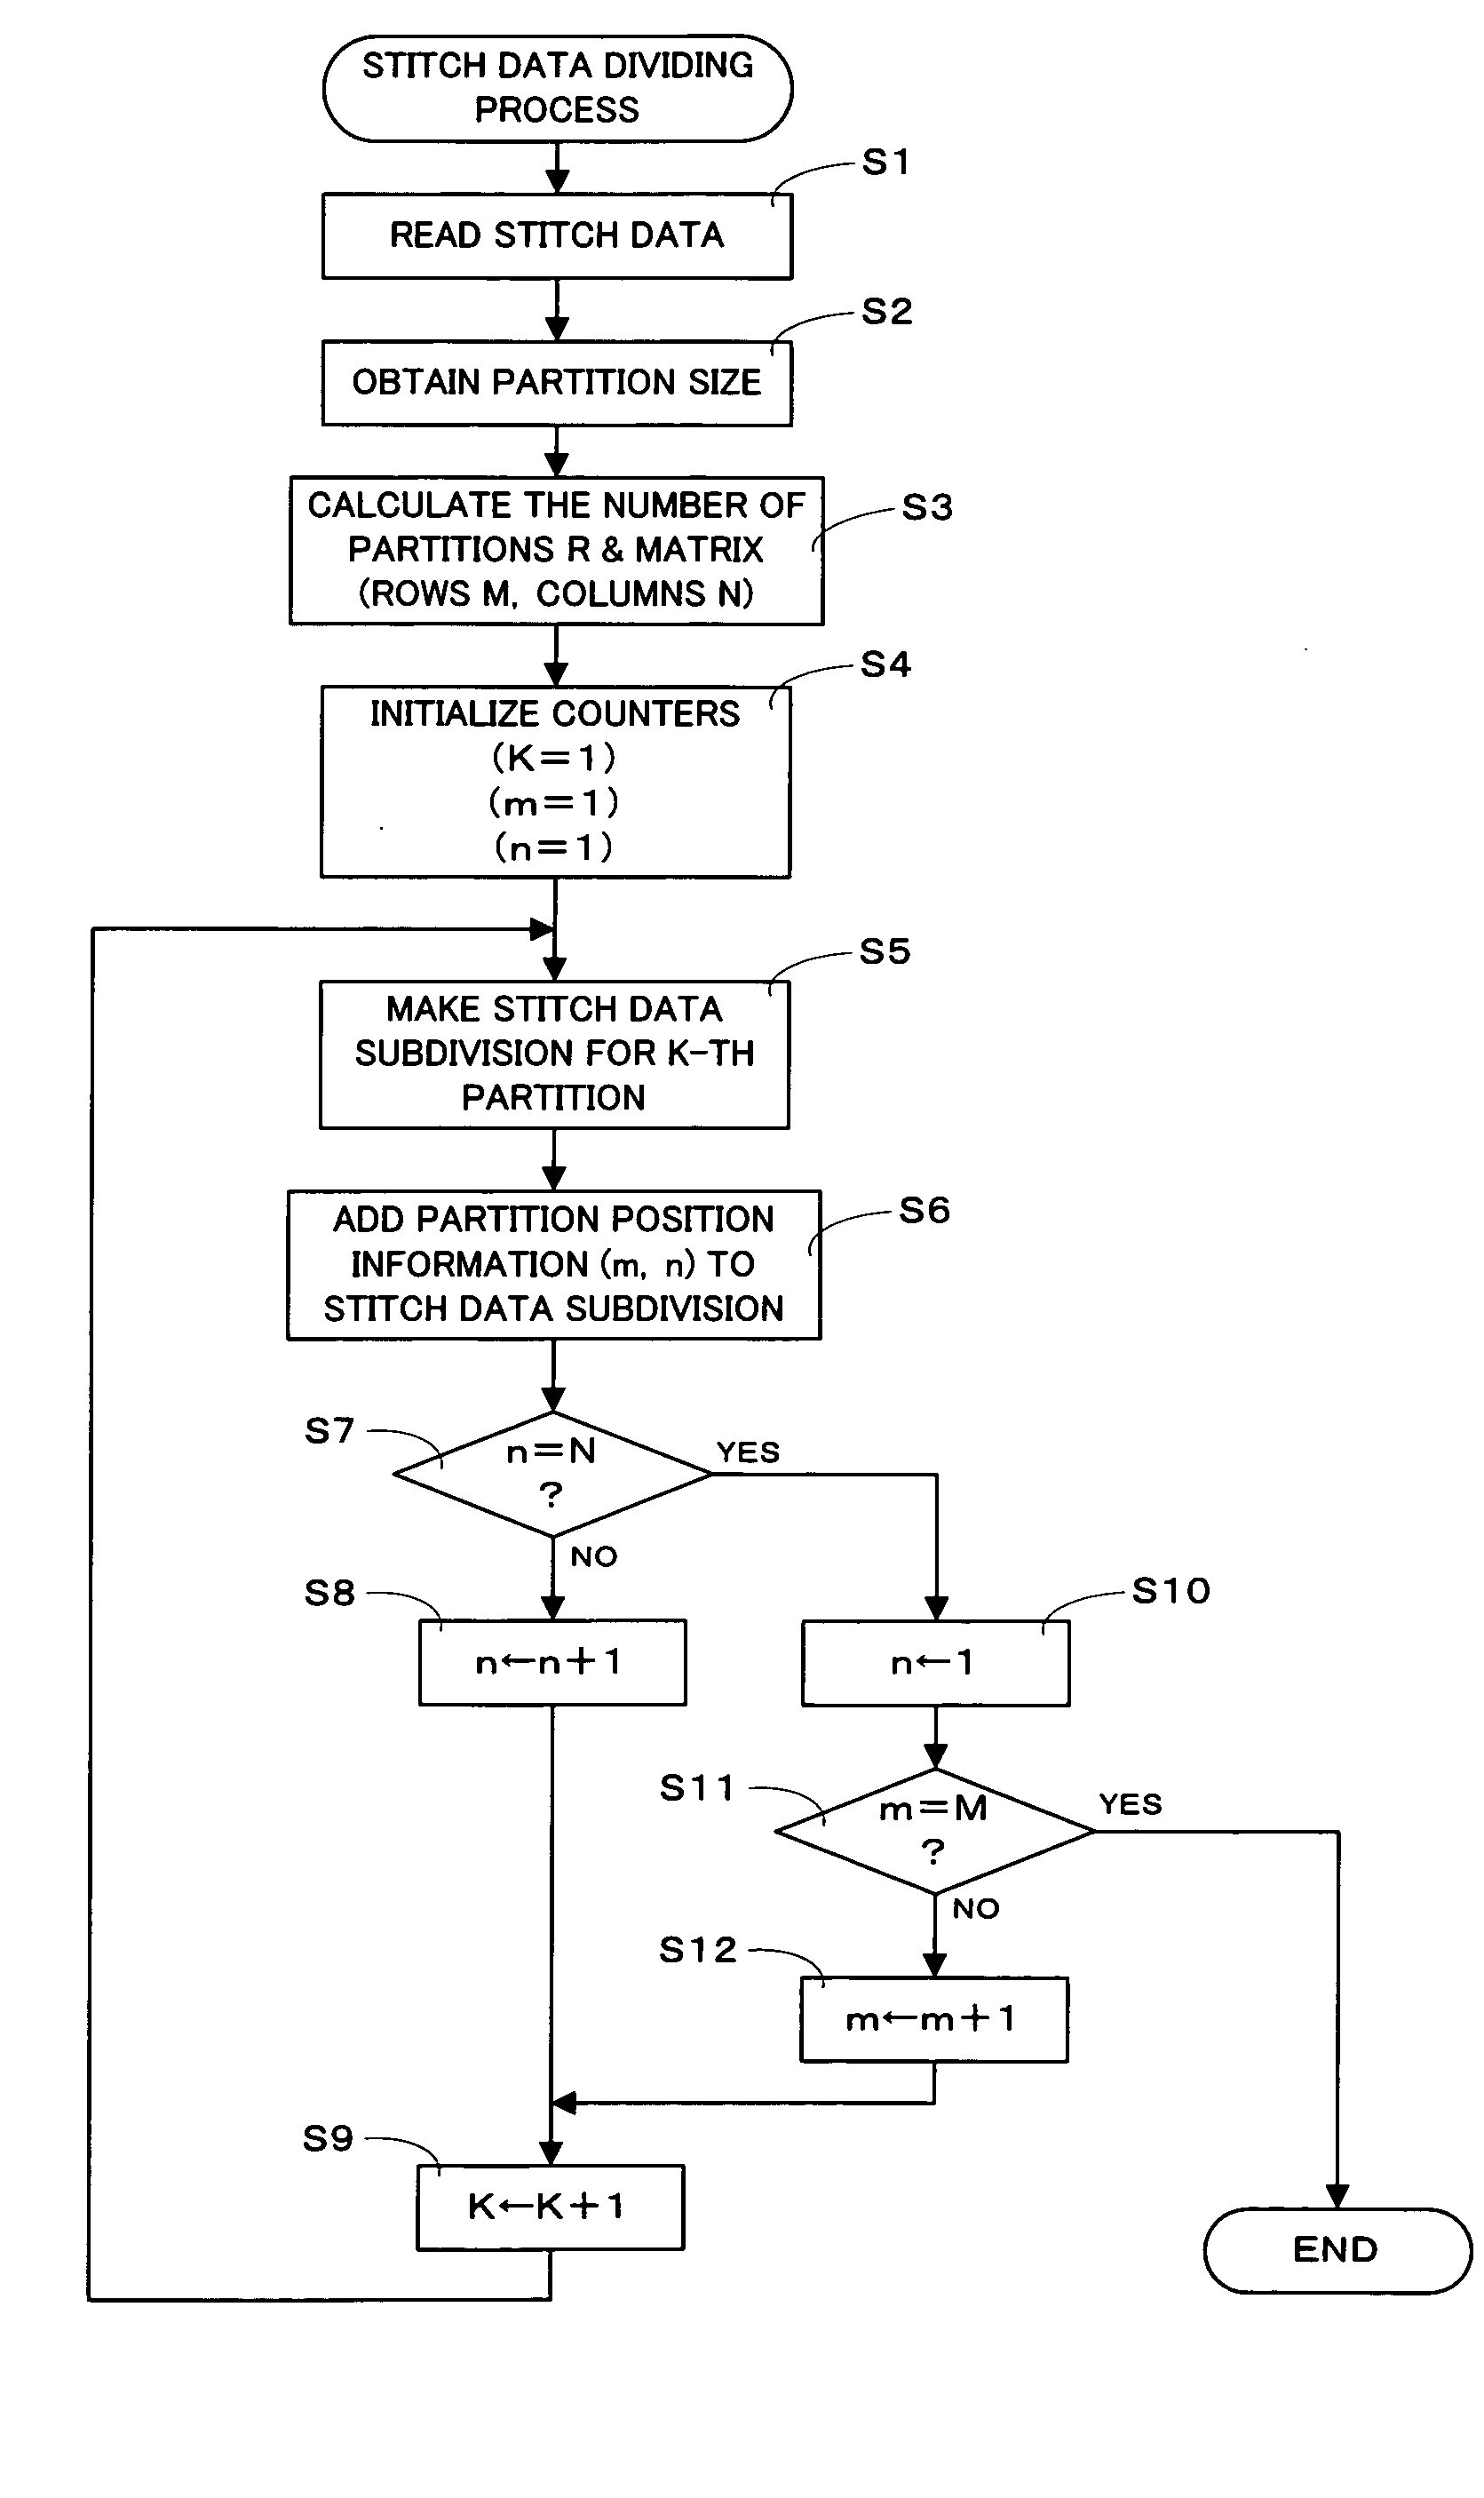 Apparatus and program stored on a computer readable medium for processing embroidery data